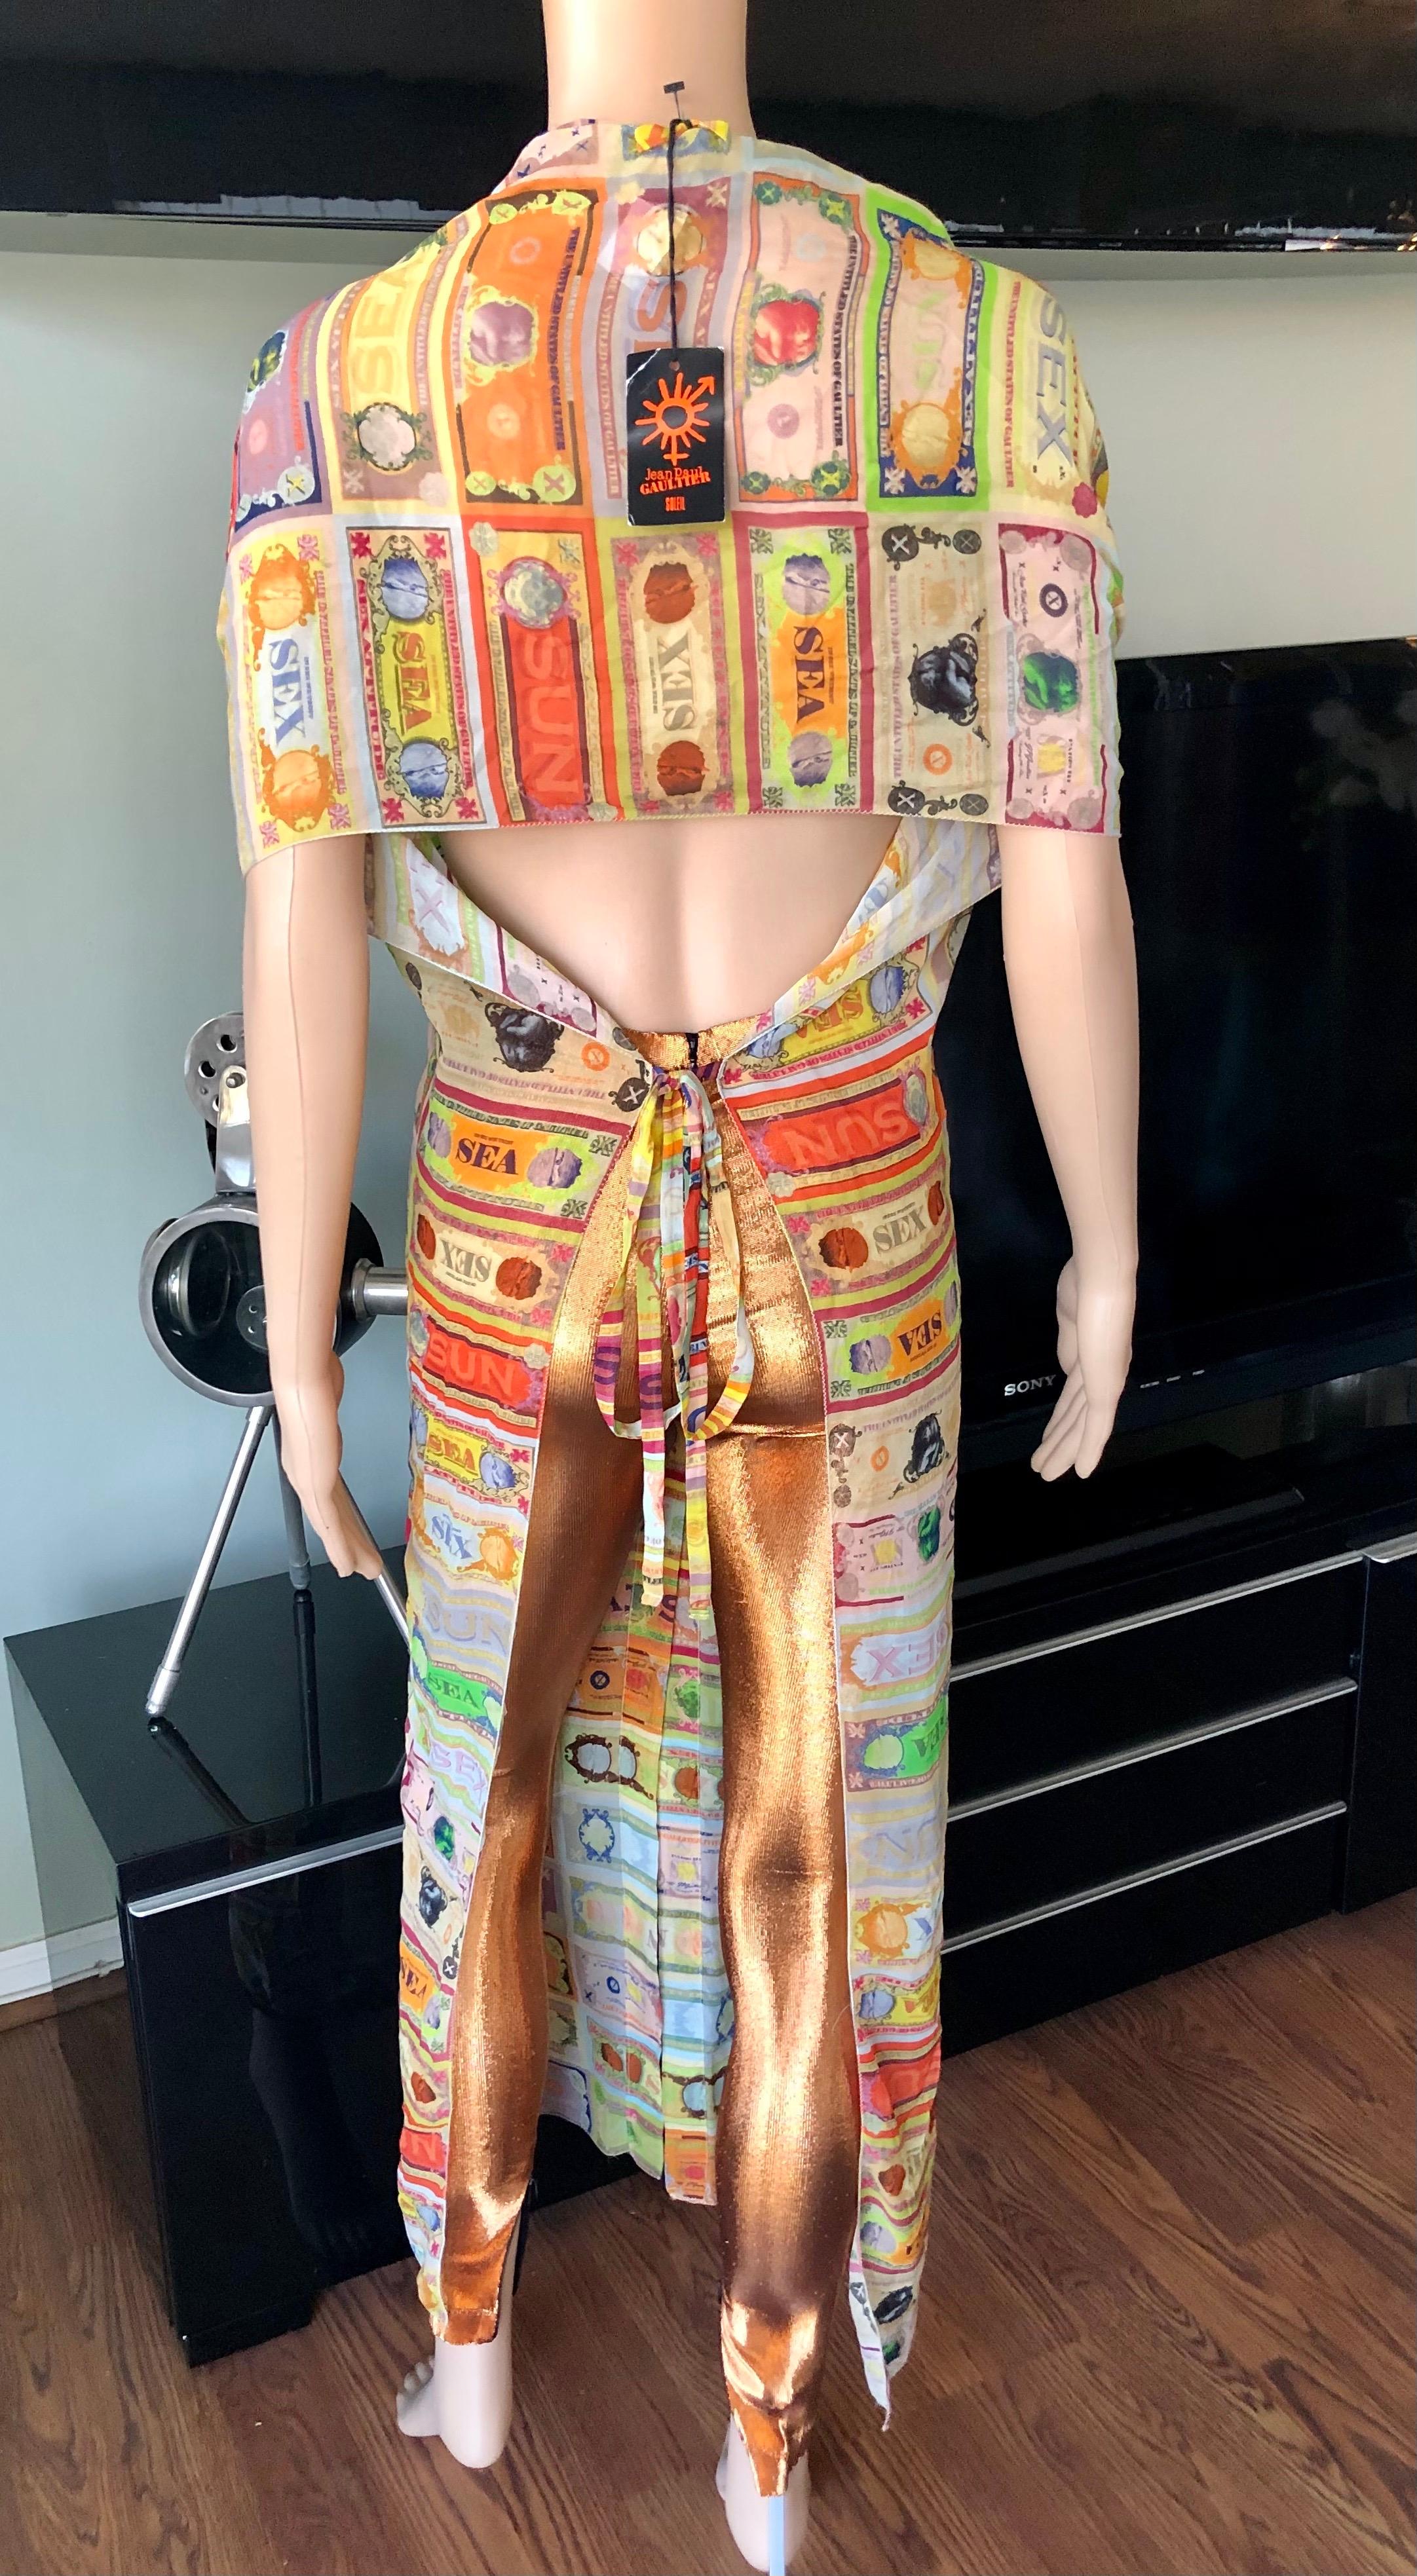 Jean Paul Gaultier Soleil Vintage Currency Money Print Backless Maxi Dress Size M

New with tags